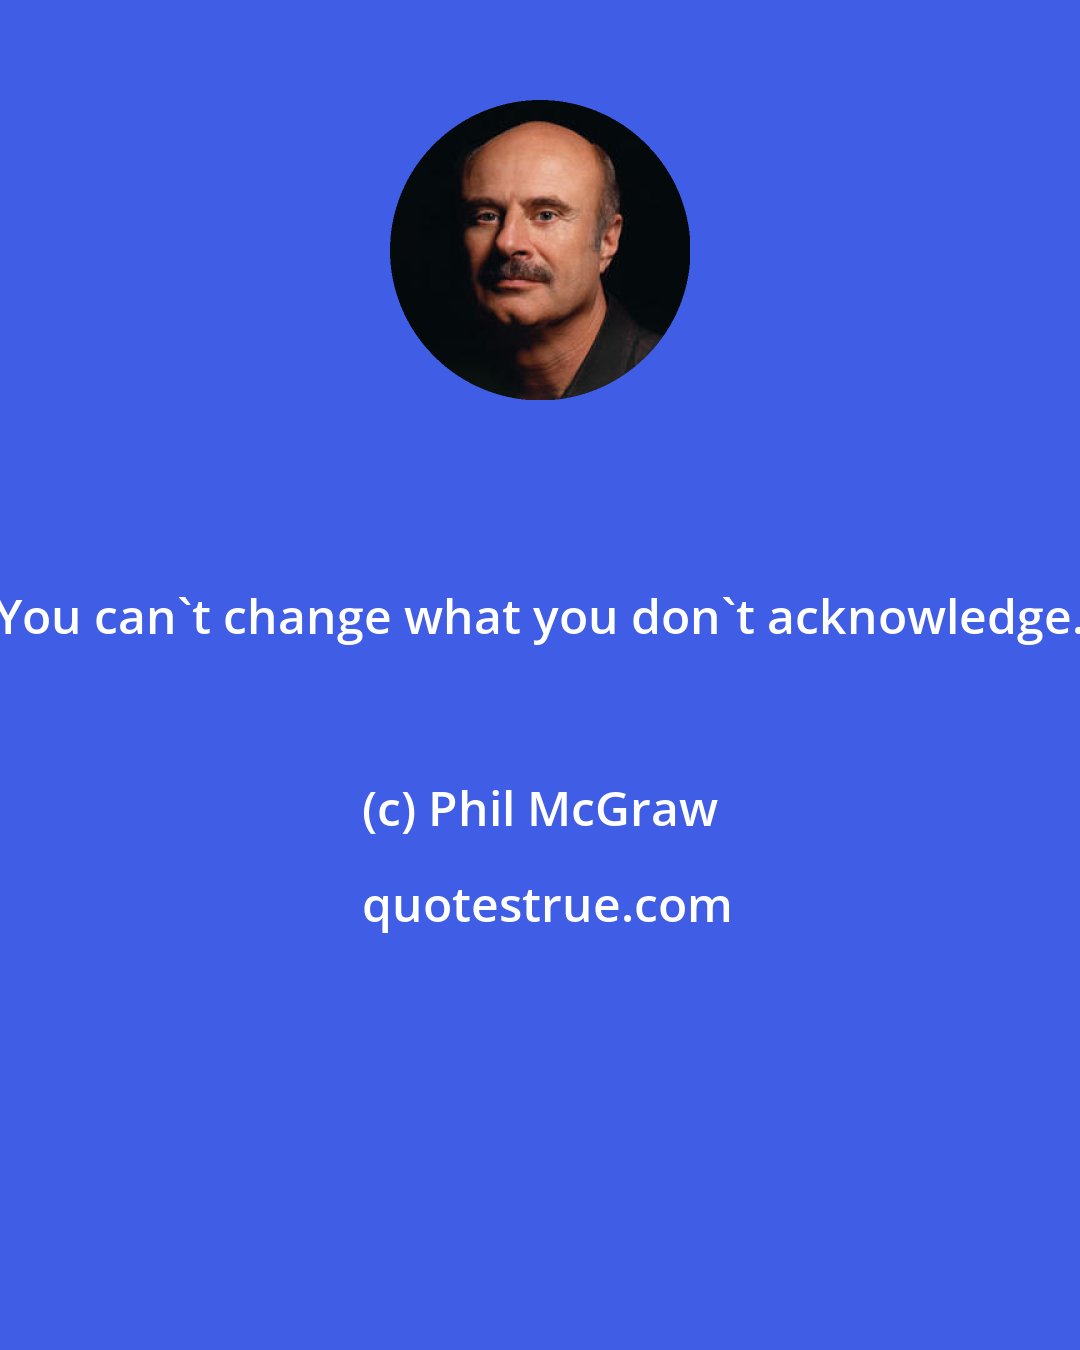 Phil McGraw: You can't change what you don't acknowledge.